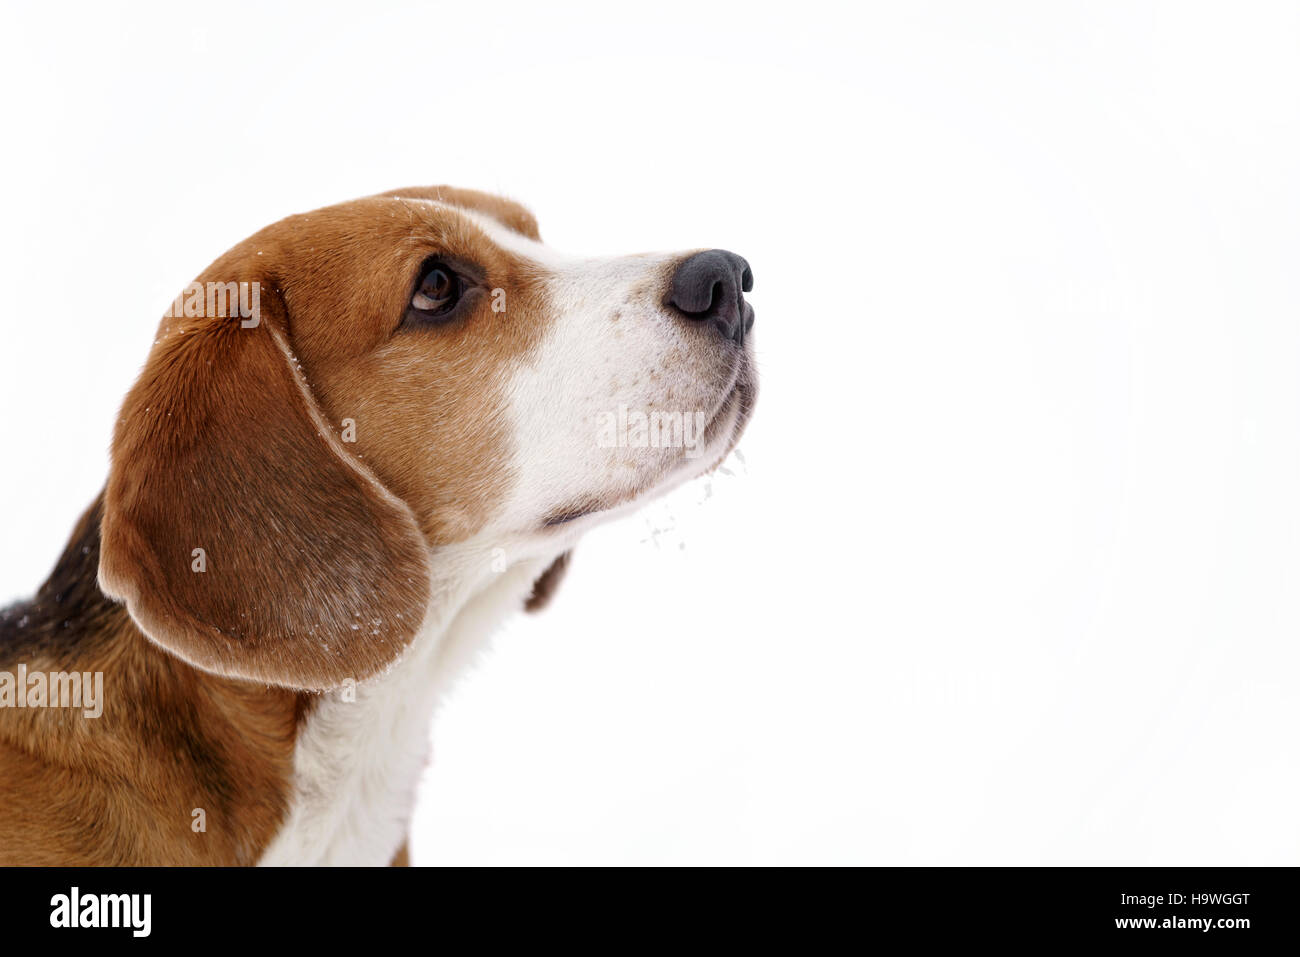 beagle dog outdoor winter portrait with copyspace Stock Photo